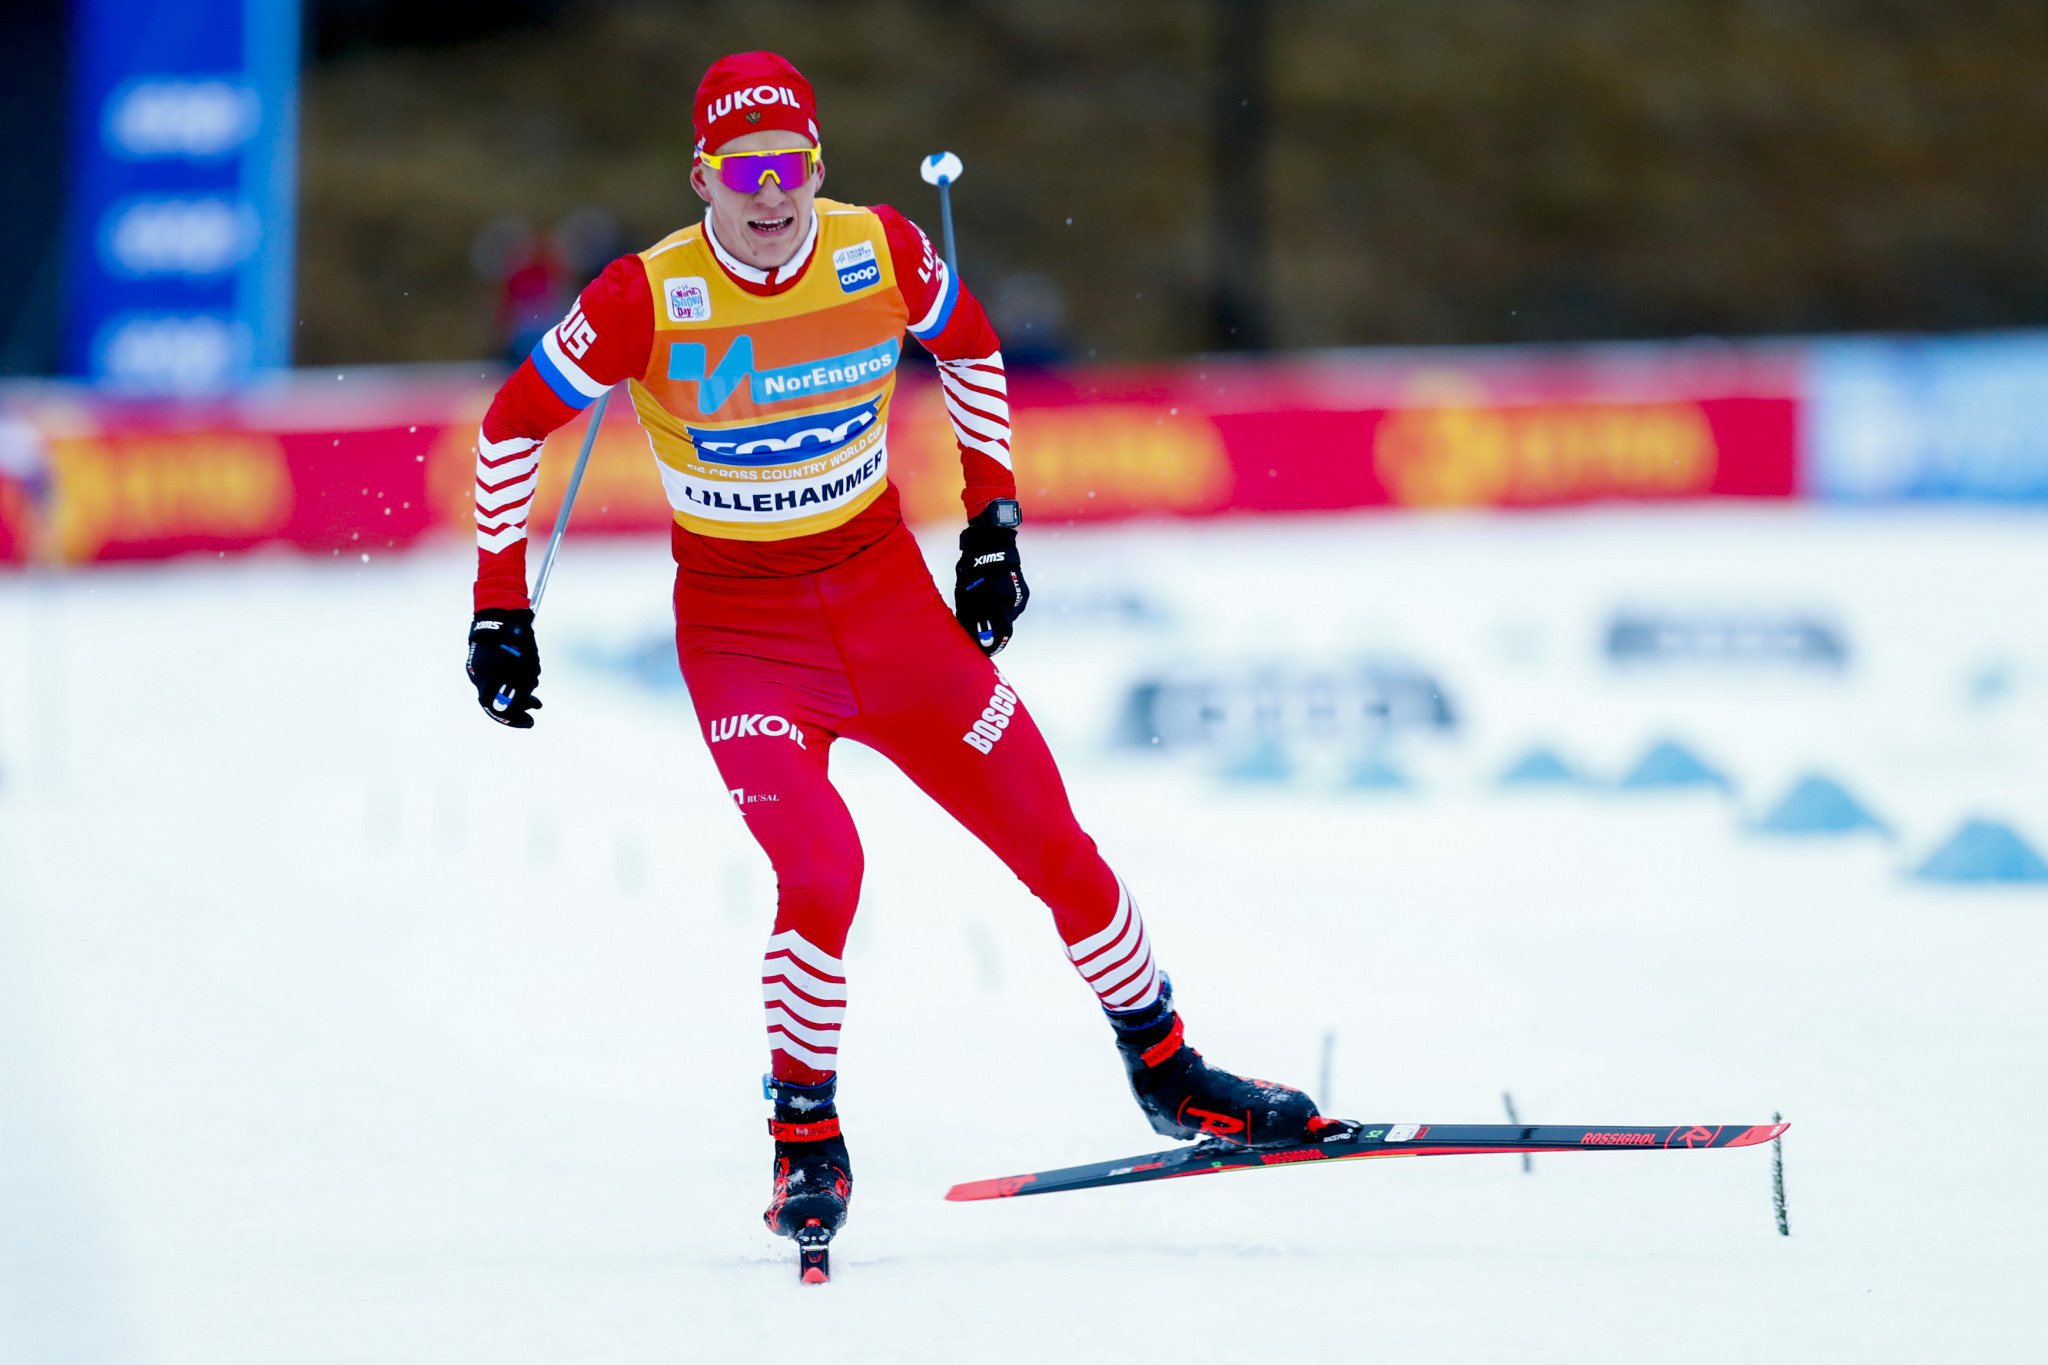 Alexander Bolshunov will eye further sprint success at the FIS Cross-Country World Cup in Davos ©Getty Images